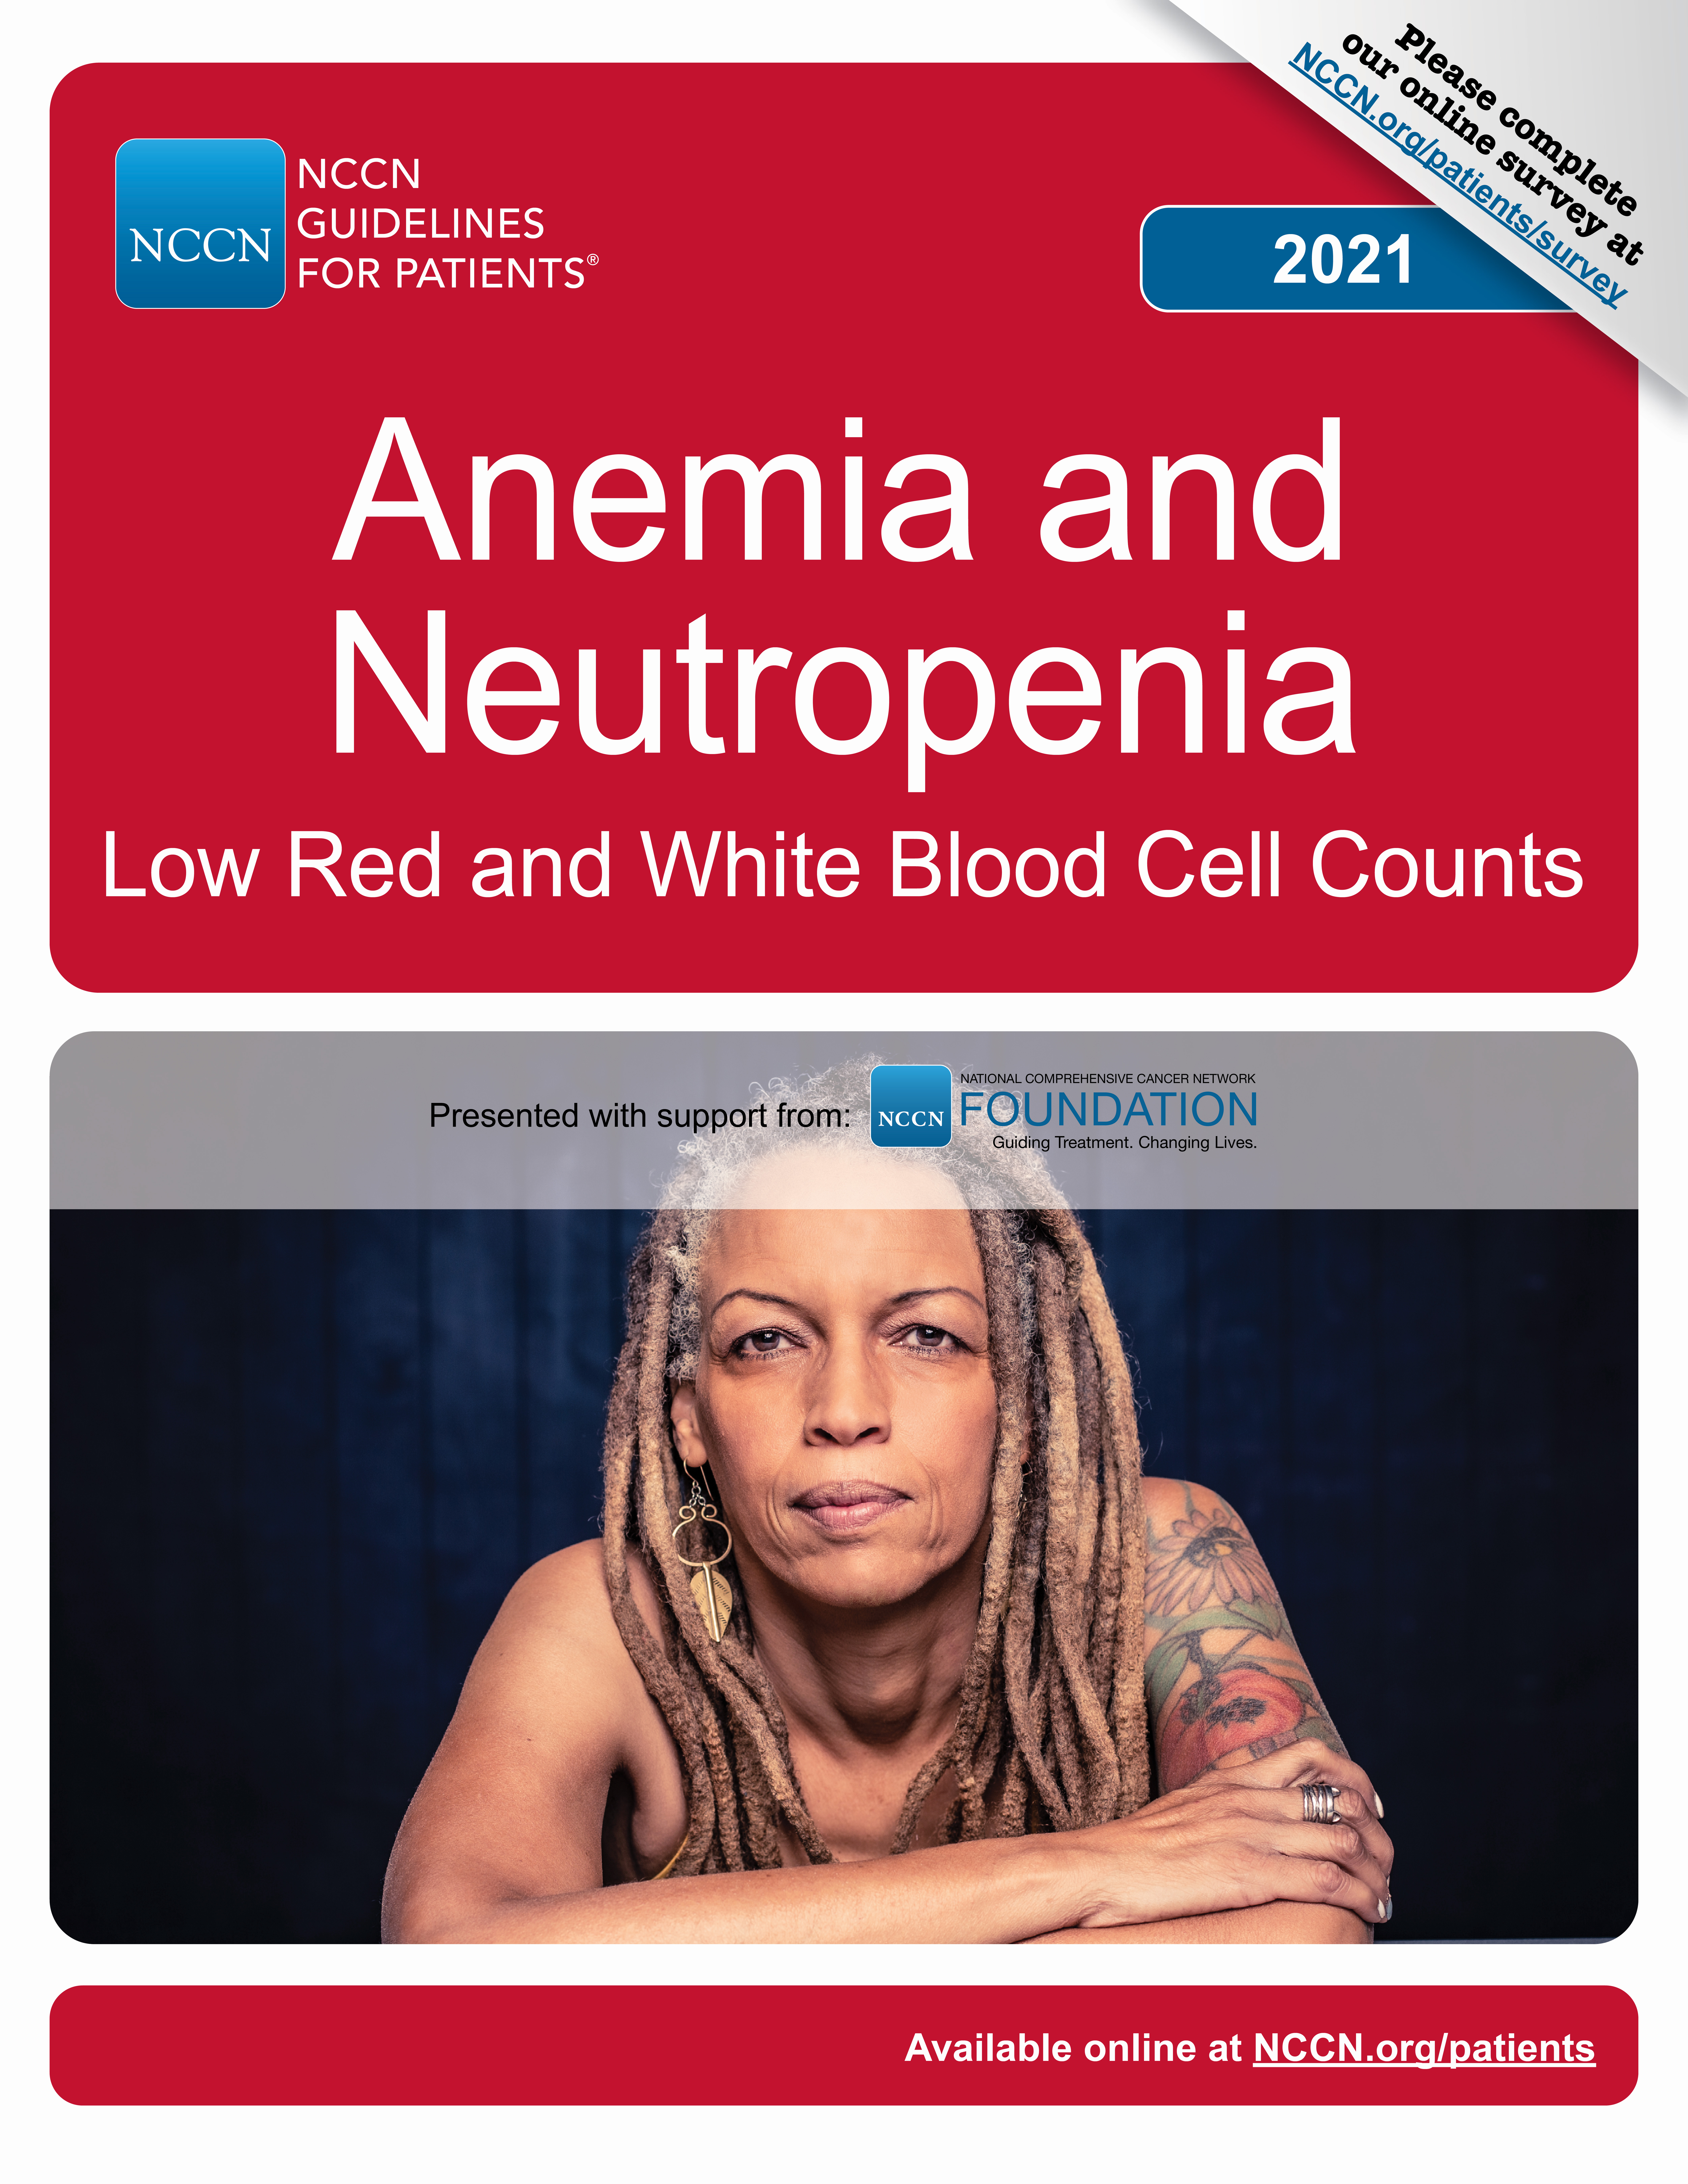 NCCN Guidelines for Patients®: Anemia and Neutropenia, Low Red and White Blood Cell Counts